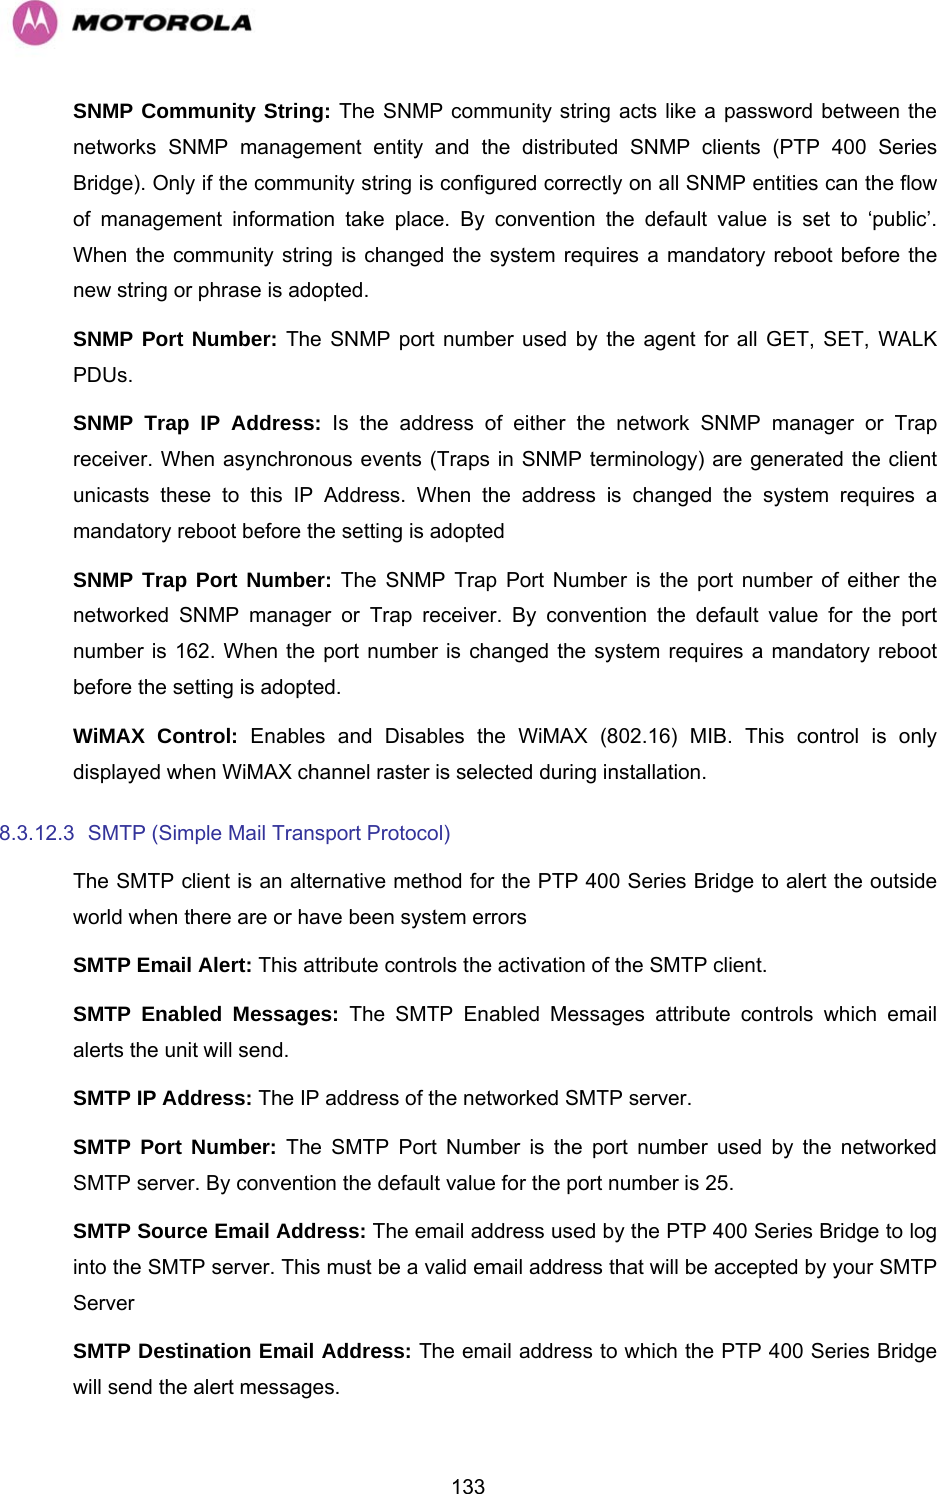   133SNMP Community String: The SNMP community string acts like a password between the networks SNMP management entity and the distributed SNMP clients (PTP 400 Series Bridge). Only if the community string is configured correctly on all SNMP entities can the flow of management information take place. By convention the default value is set to ‘public’. When the community string is changed the system requires a mandatory reboot before the new string or phrase is adopted. SNMP Port Number: The SNMP port number used by the agent for all GET, SET, WALK PDUs. SNMP Trap IP Address: Is the address of either the network SNMP manager or Trap receiver. When asynchronous events (Traps in SNMP terminology) are generated the client unicasts these to this IP Address. When the address is changed the system requires a mandatory reboot before the setting is adopted SNMP Trap Port Number: The SNMP Trap Port Number is the port number of either the networked SNMP manager or Trap receiver. By convention the default value for the port number is 162. When the port number is changed the system requires a mandatory reboot before the setting is adopted. WiMAX Control: Enables and Disables the WiMAX (802.16) MIB. This control is only displayed when WiMAX channel raster is selected during installation. 8.3.12.3  SMTP (Simple Mail Transport Protocol)  The SMTP client is an alternative method for the PTP 400 Series Bridge to alert the outside world when there are or have been system errors SMTP Email Alert: This attribute controls the activation of the SMTP client. SMTP Enabled Messages: The SMTP Enabled Messages attribute controls which email alerts the unit will send. SMTP IP Address: The IP address of the networked SMTP server. SMTP Port Number: The SMTP Port Number is the port number used by the networked SMTP server. By convention the default value for the port number is 25. SMTP Source Email Address: The email address used by the PTP 400 Series Bridge to log into the SMTP server. This must be a valid email address that will be accepted by your SMTP Server SMTP Destination Email Address: The email address to which the PTP 400 Series Bridge will send the alert messages. 